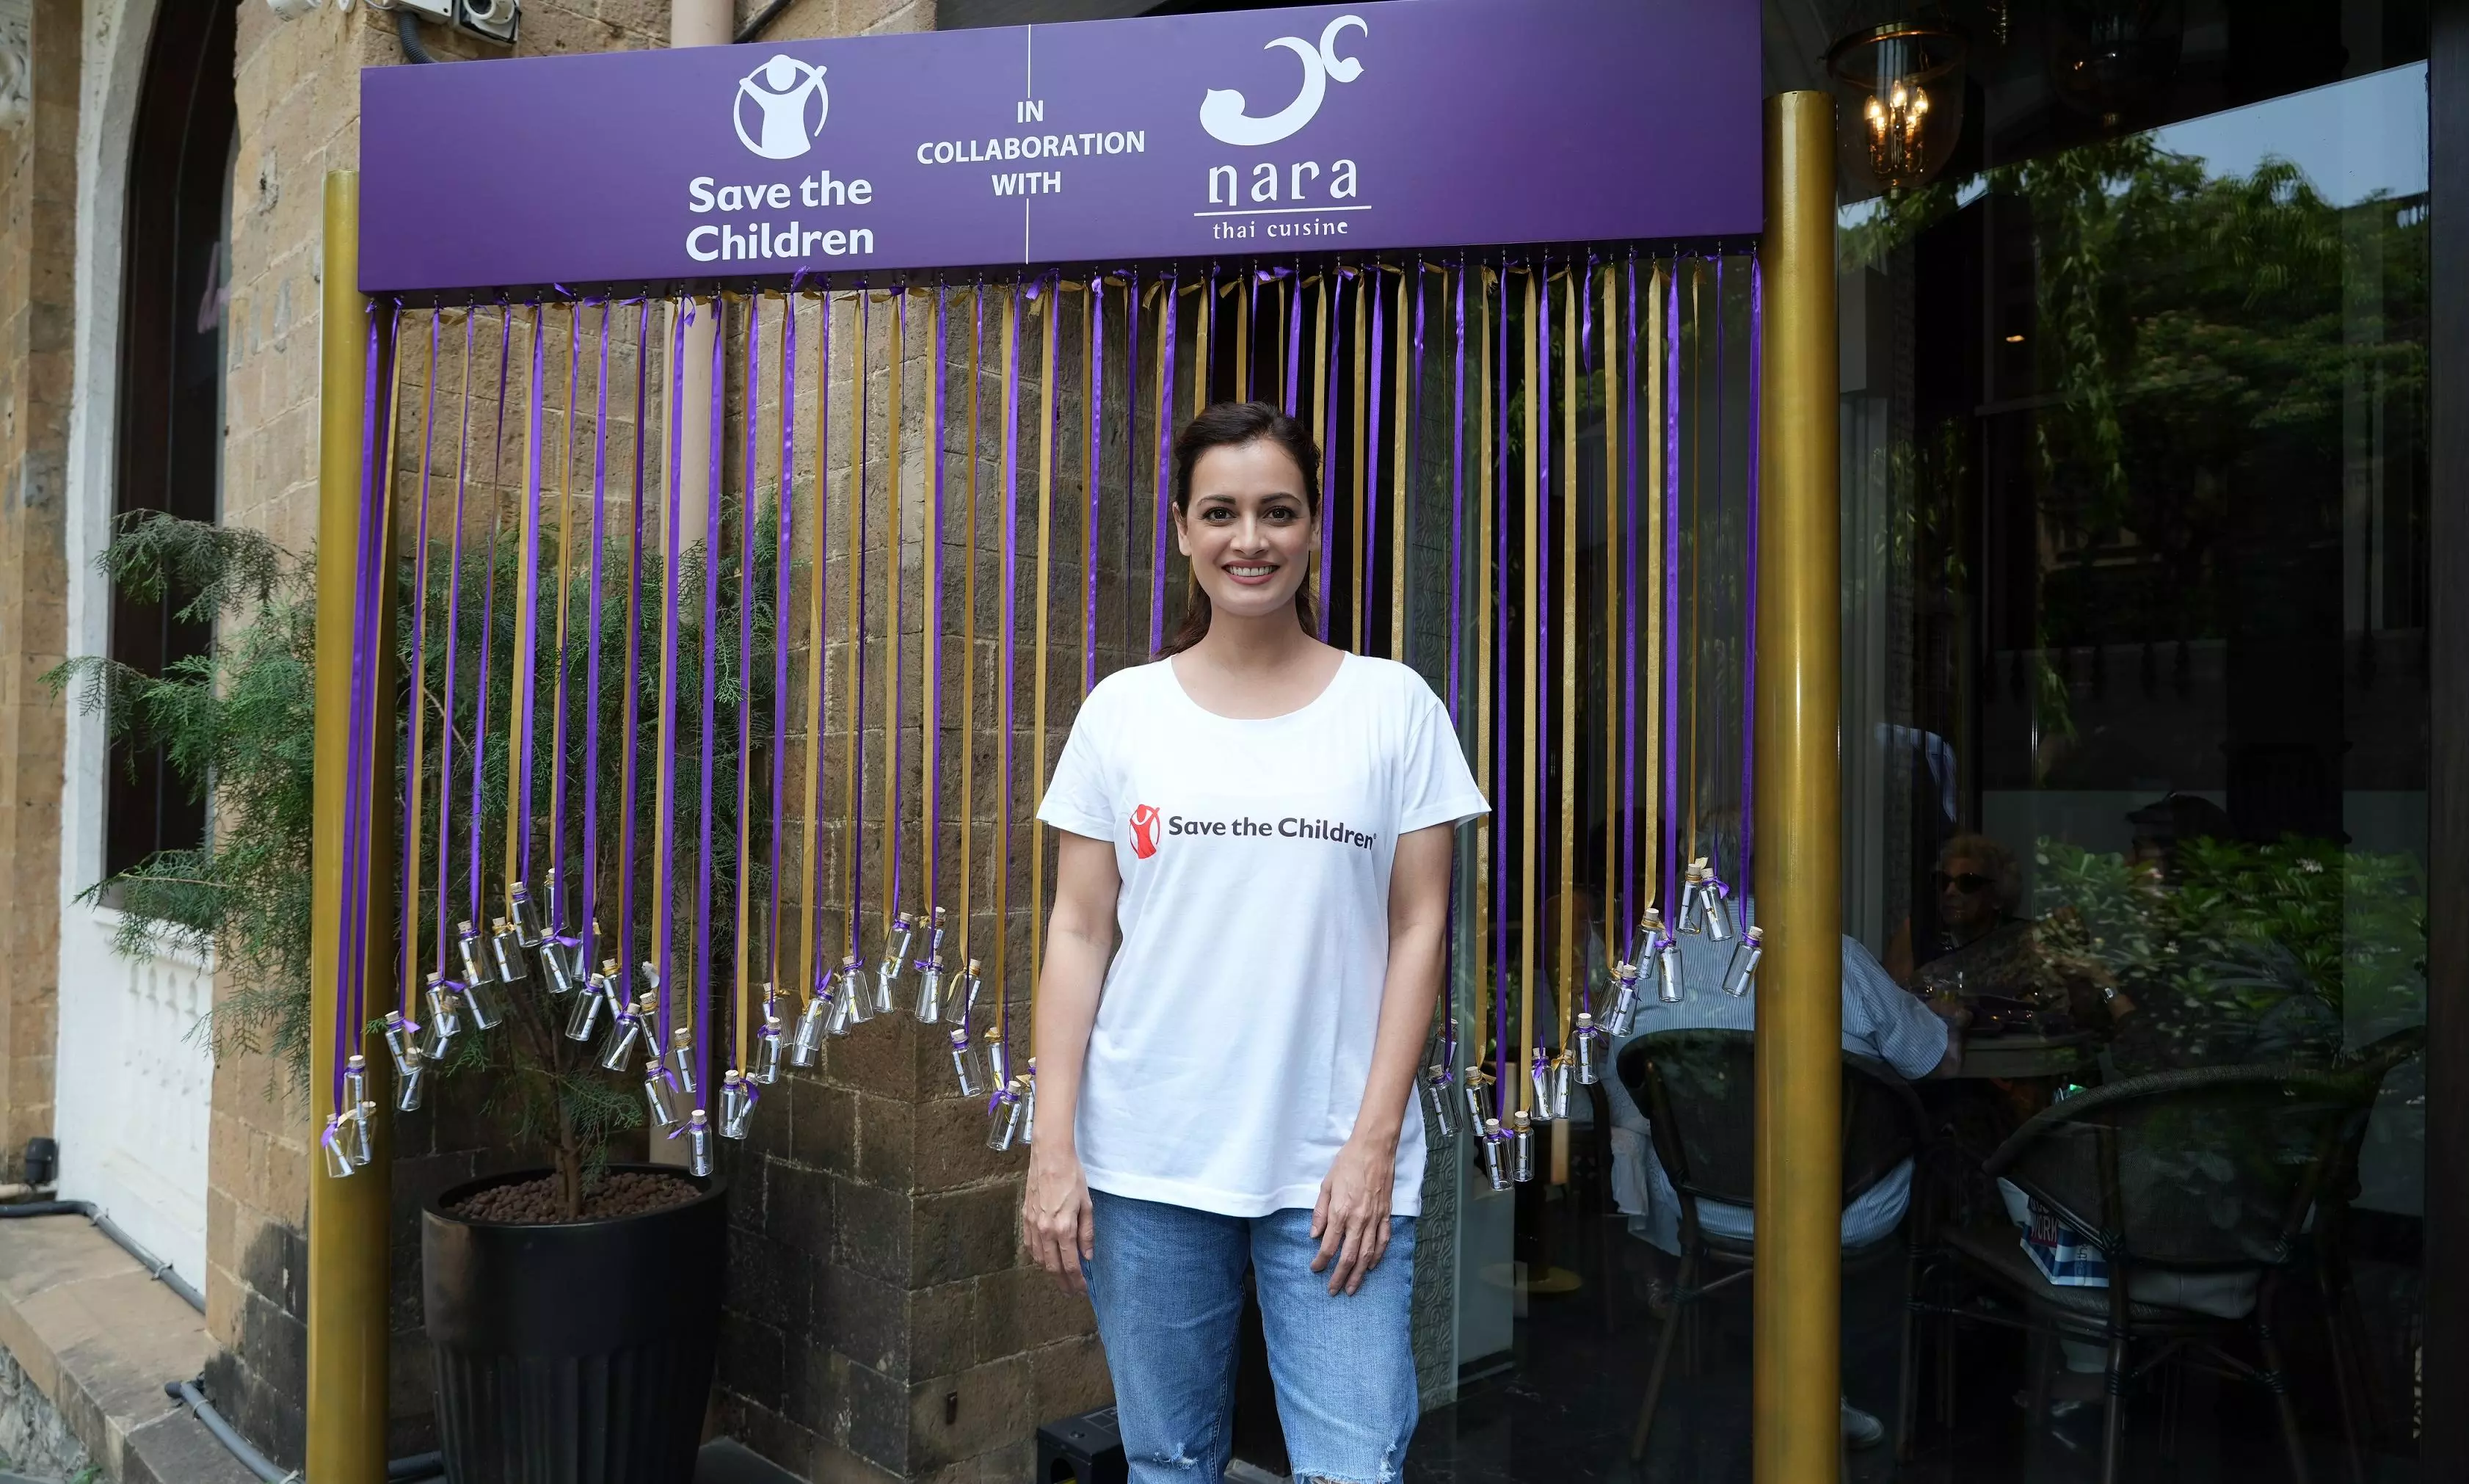 Celebrating Songkran with Dia Mirza, Nara Thai and progressive campaigns for a better India